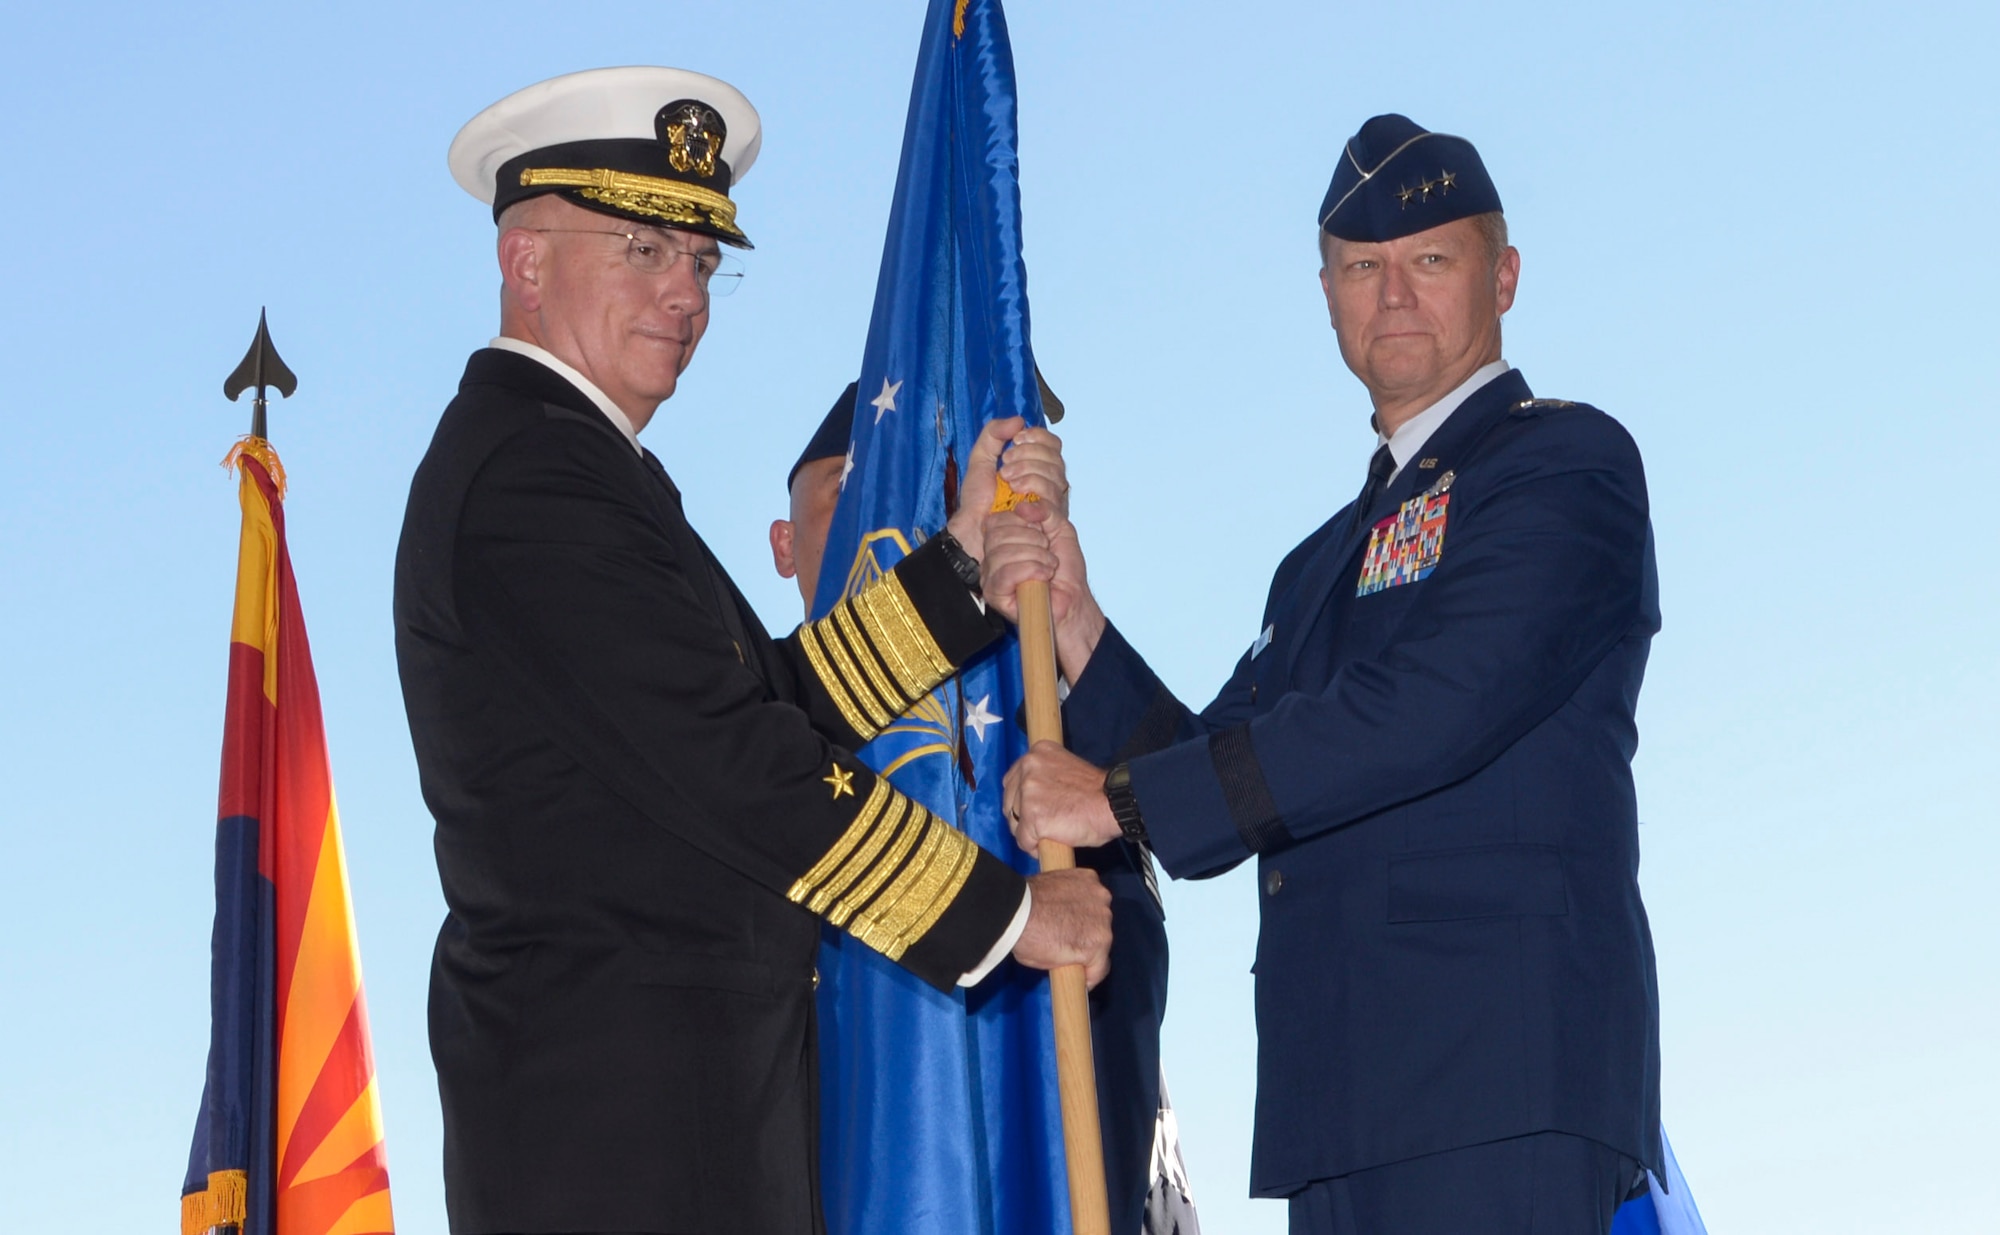 Adm. Kurt Tidd, commander of U.S. Southern Command, passes the Twelfth Air Force (Air Forces Southern) flag to Lt. Gen. Mark Kelly, commander of Twelfth Air Force (Air Forces Southern), during the a change of command ceremony Oct. 3, 2016, at Davis-Monthan Air Force Base, Ariz. During the ceremony Lt. Gen. Chris Nowland relinquished command to Lt. Gen. Mark Kelly. Air Forces Southern serves as the air component to U.S. Southern Command and is responsible for providing air and space capabilities in support of U.S. military partnerships across Central and South America, and the Caribbean. (U.S. Air Force photo by Tech. Sgt. Heather Redman)